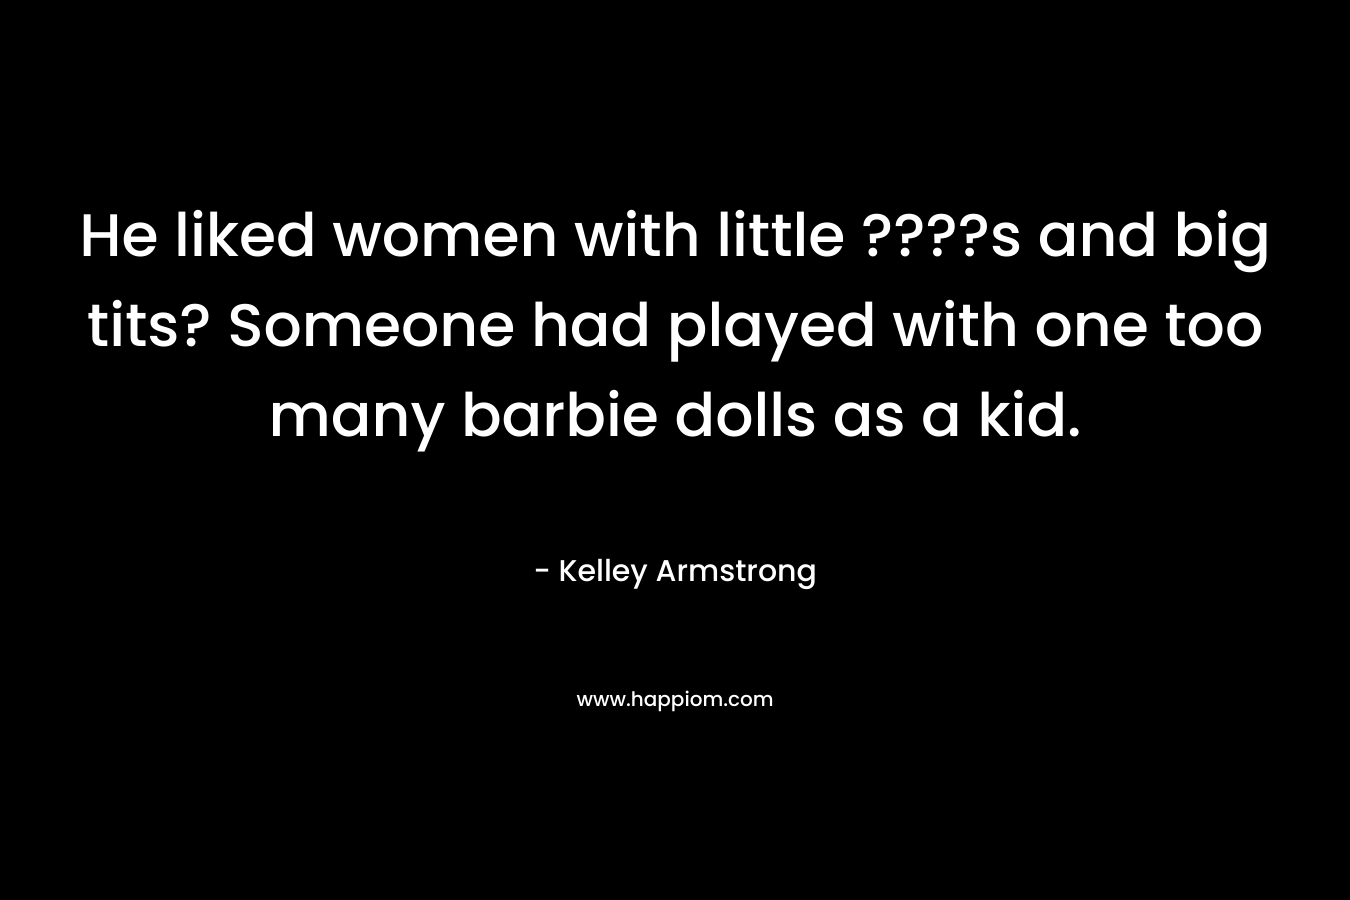 He liked women with little ????s and big tits? Someone had played with one too many barbie dolls as a kid.